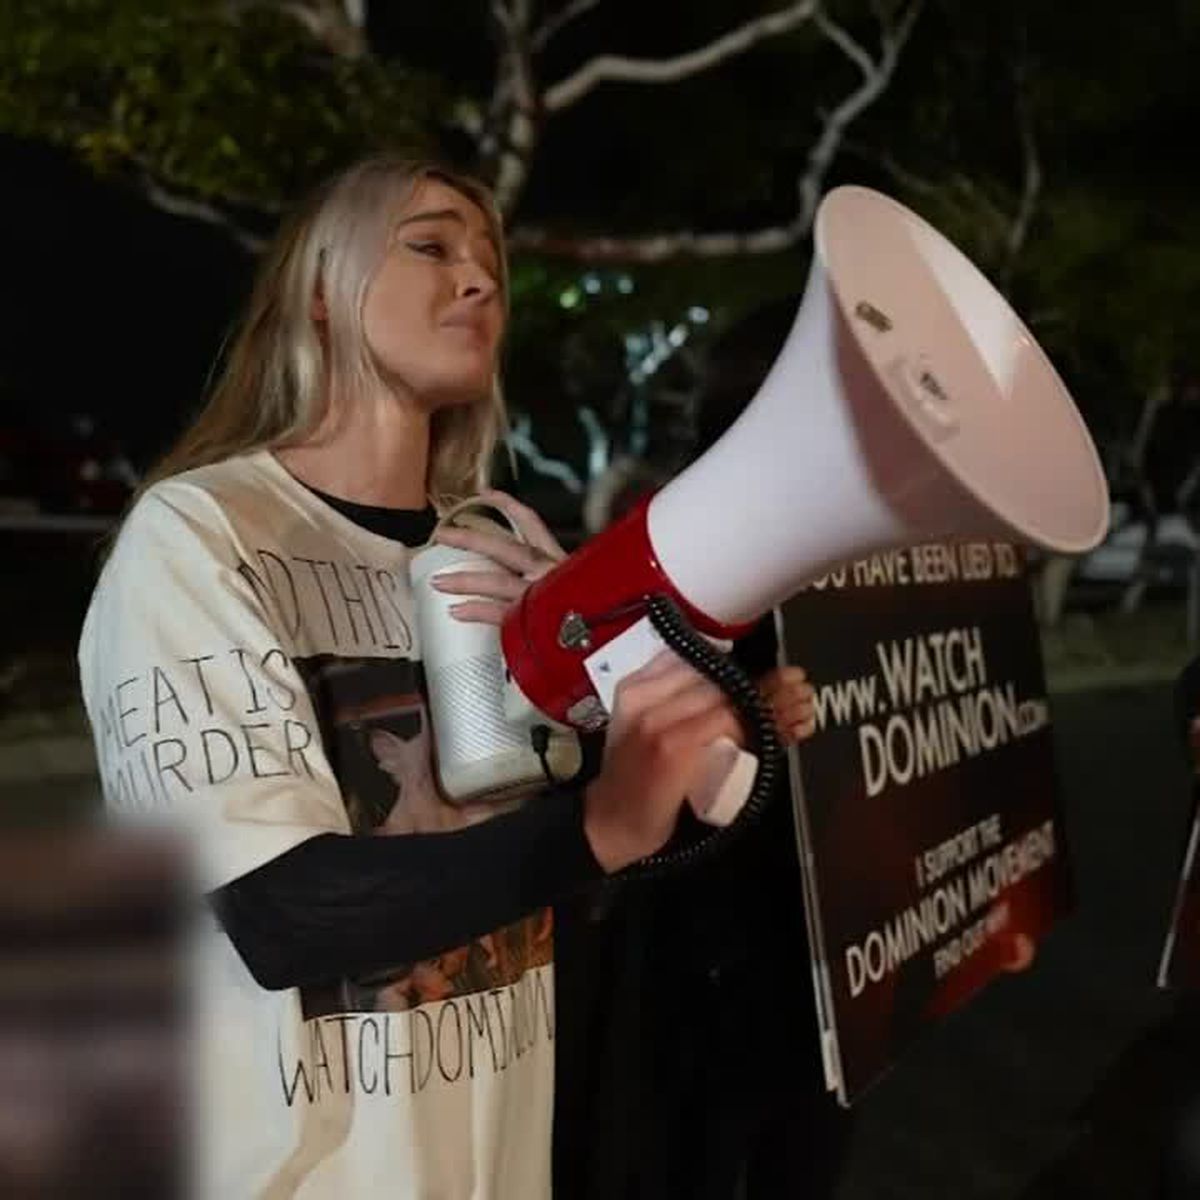 Vegan activist Tash Peterson leaving WA after being banned from